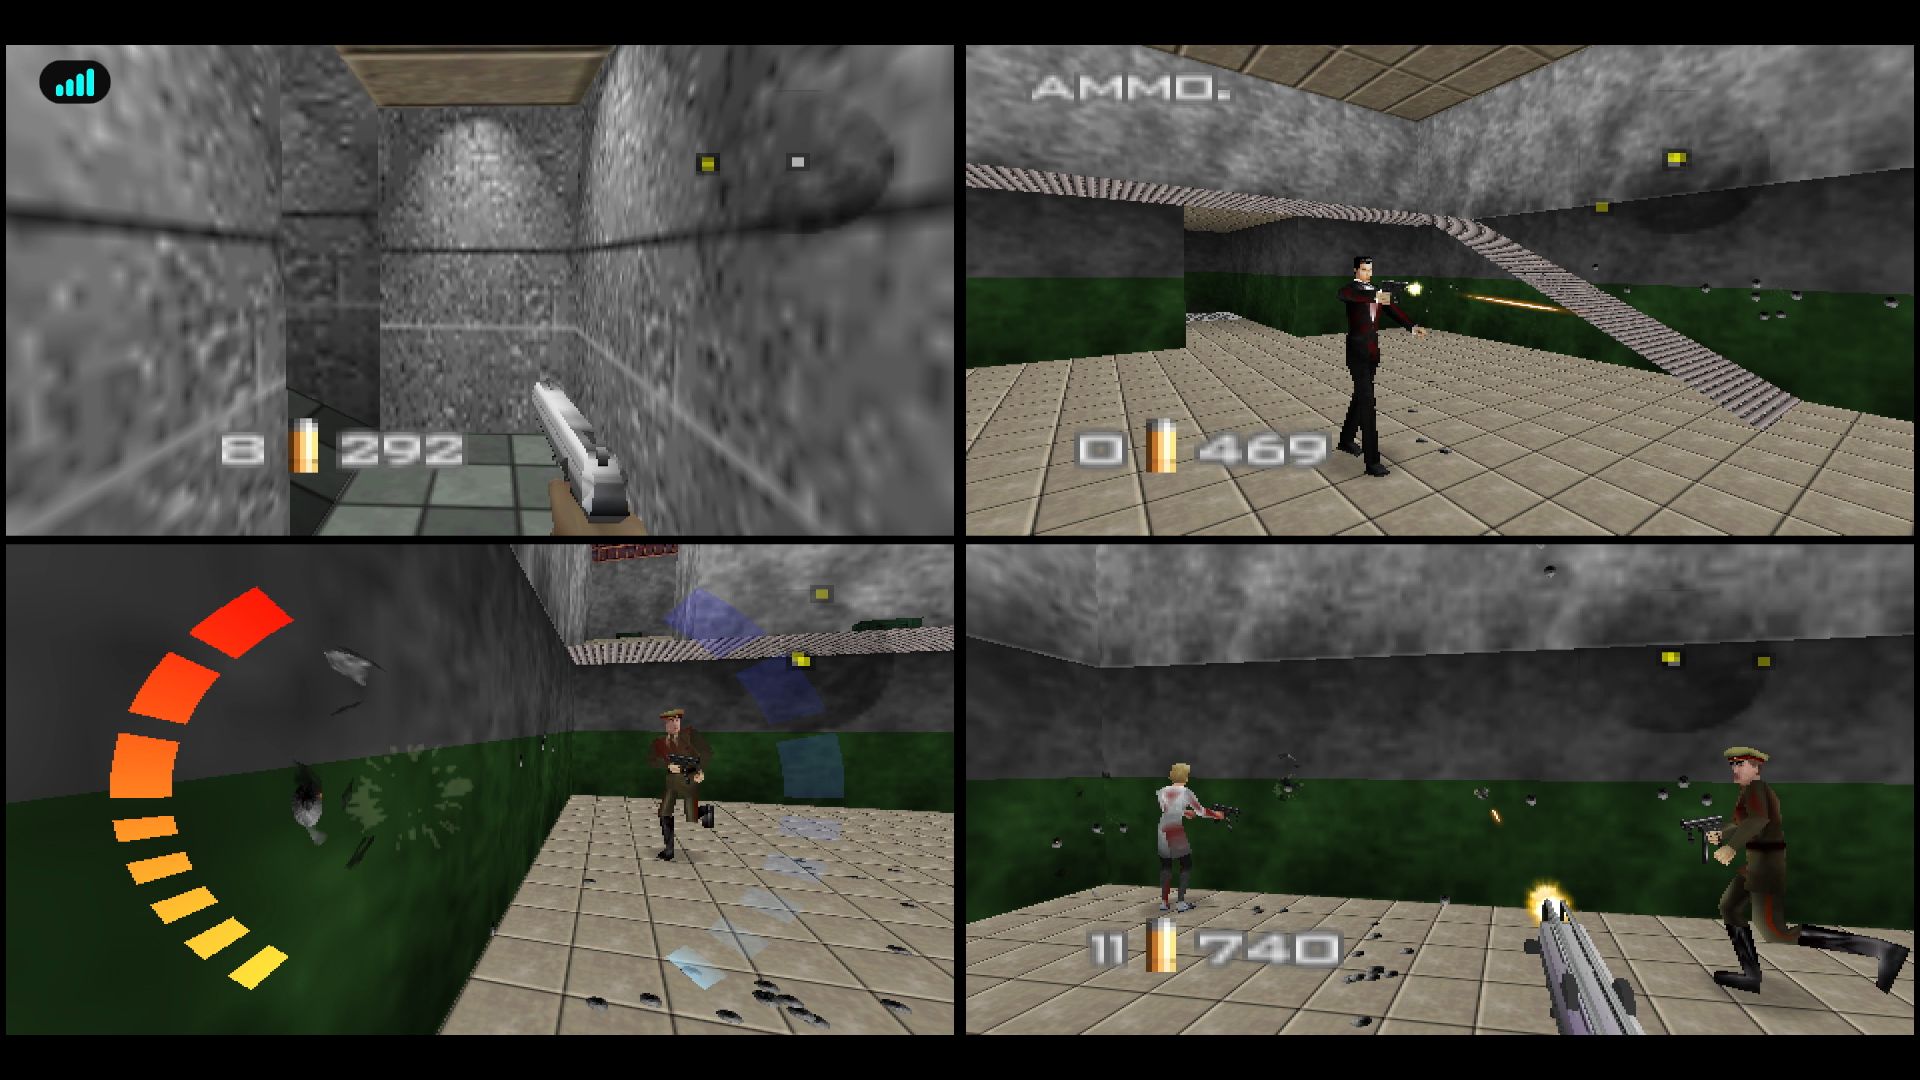 Video game screenshot of a James Bond shooting game played in four-player splitscreen